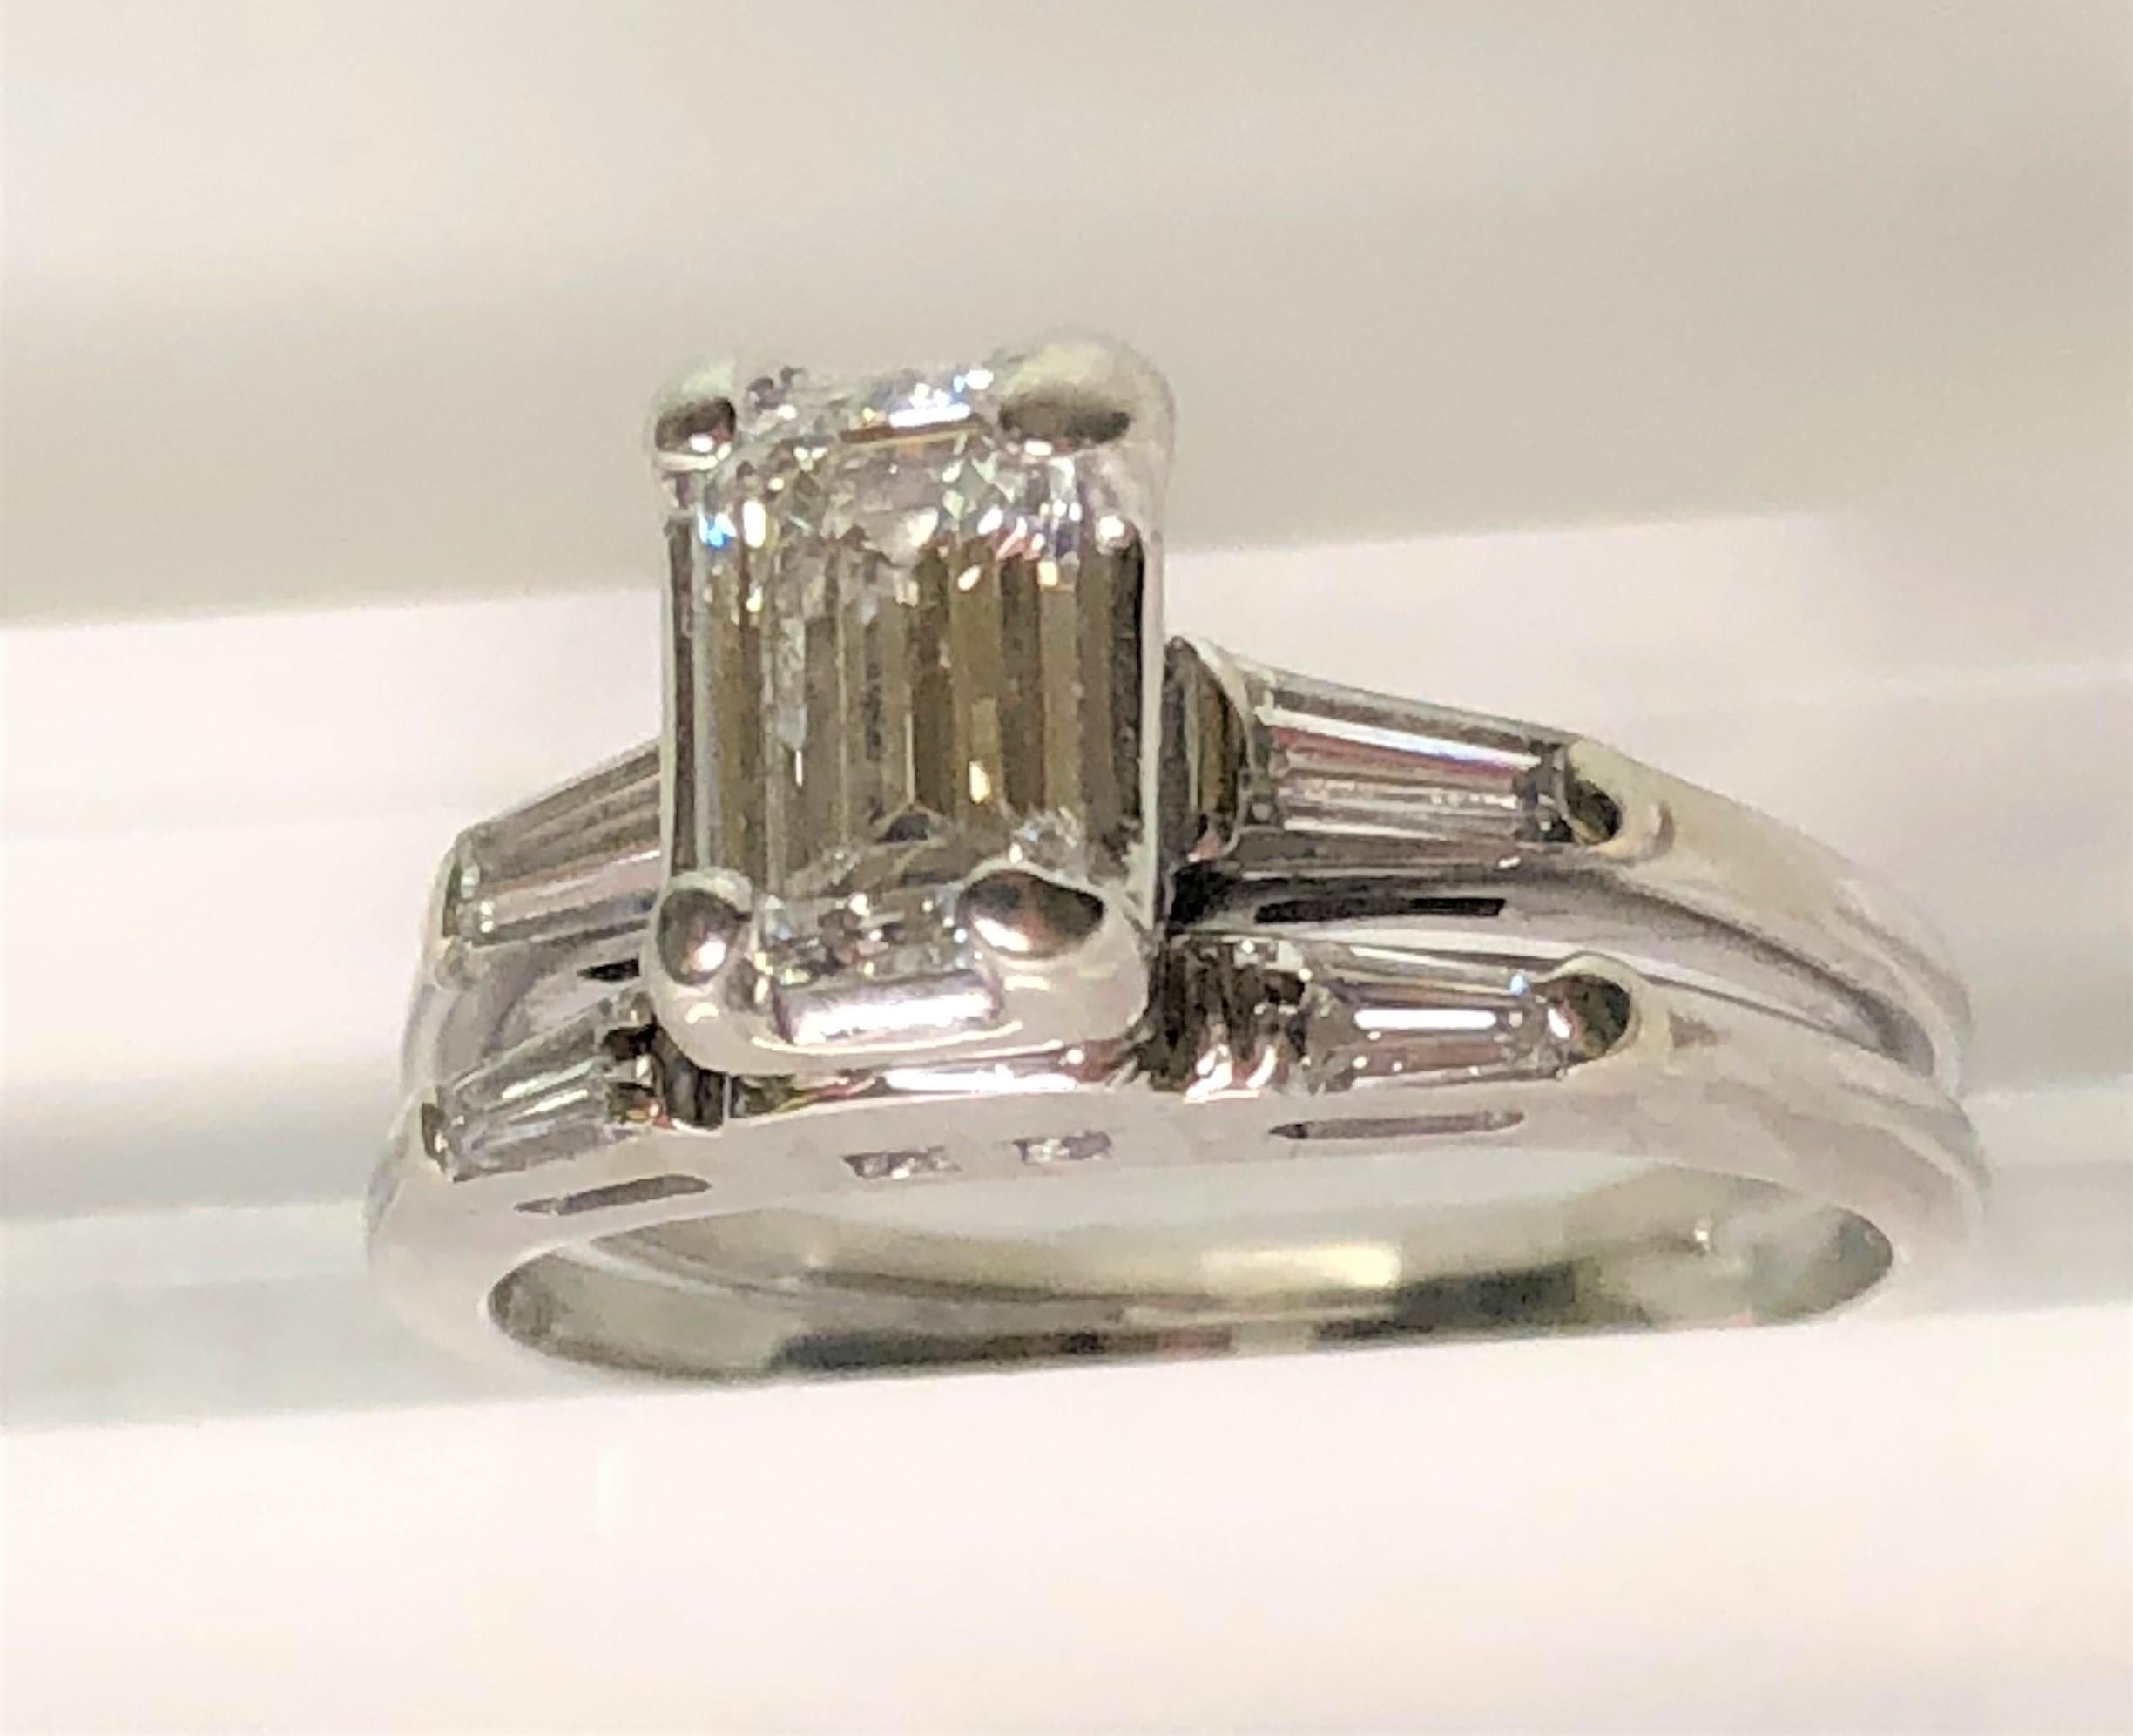 Engagement Ring and Band are soldered together.
Engagement  Ring:
   14 karat white gold
   Center emerald cut diamond H-I color, VS clarity,  approximately .75tdw.
   2 tapered baguette side diamonds H-I color, VS clarity, approximately .10ct